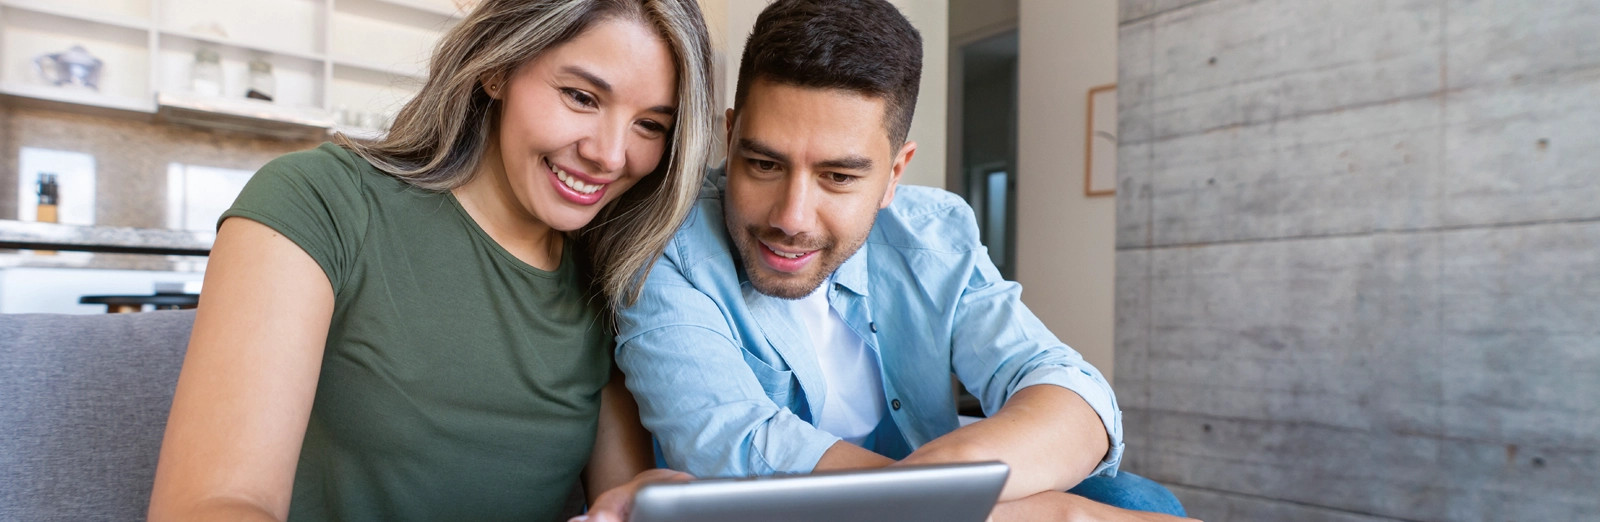 couple-looking-at-tablet-1600x522.webp